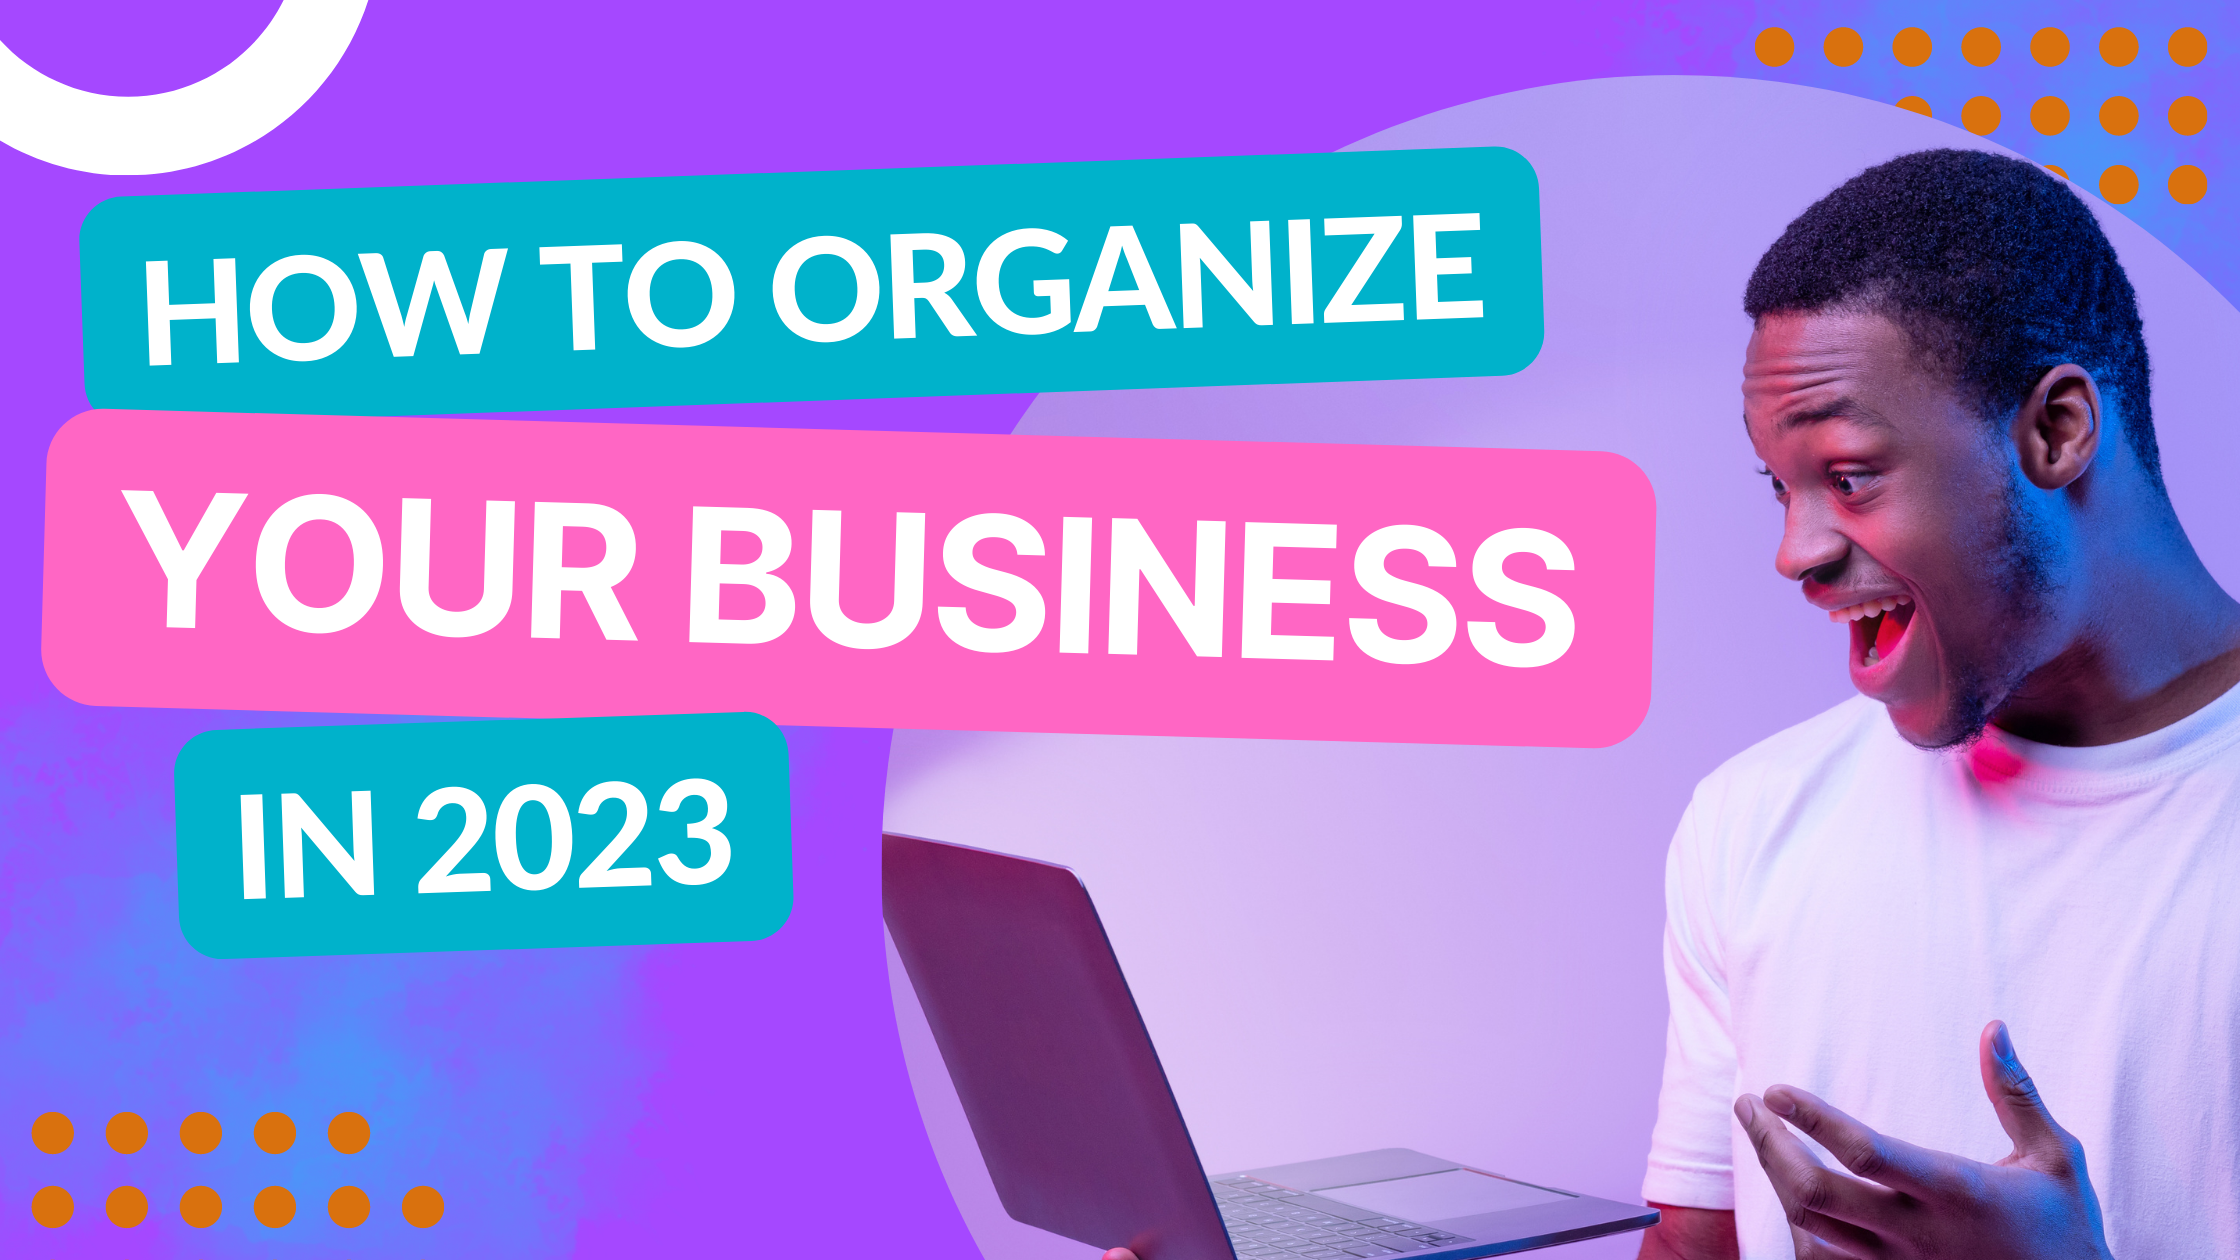 organization tips for business in 2023